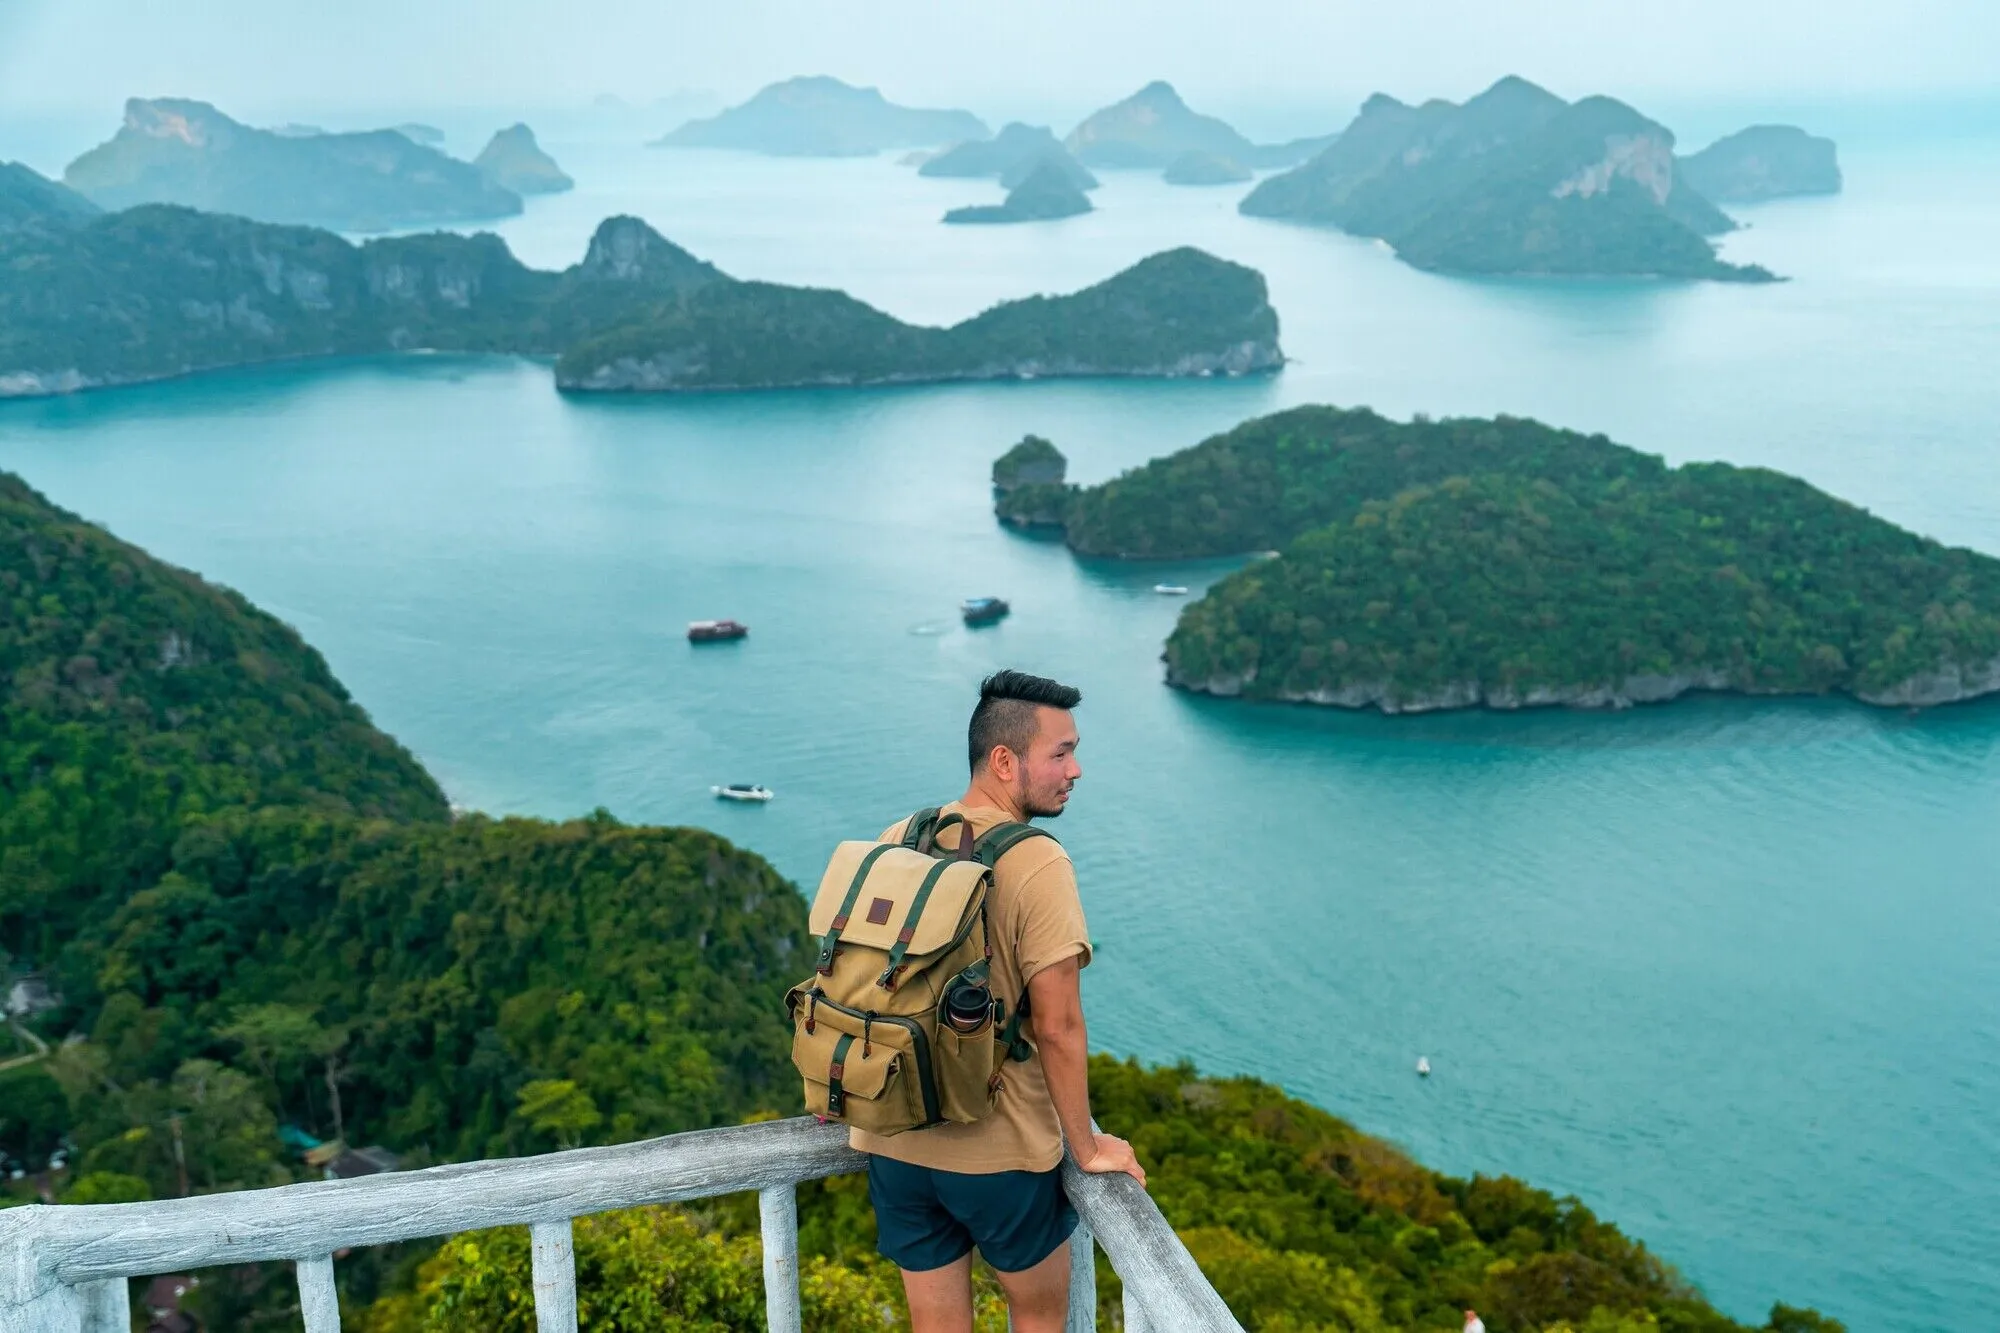 13 Impressive Things to Do in Koh Samui for First-Timers - A Complete Guide to Backpacking Koh Samui